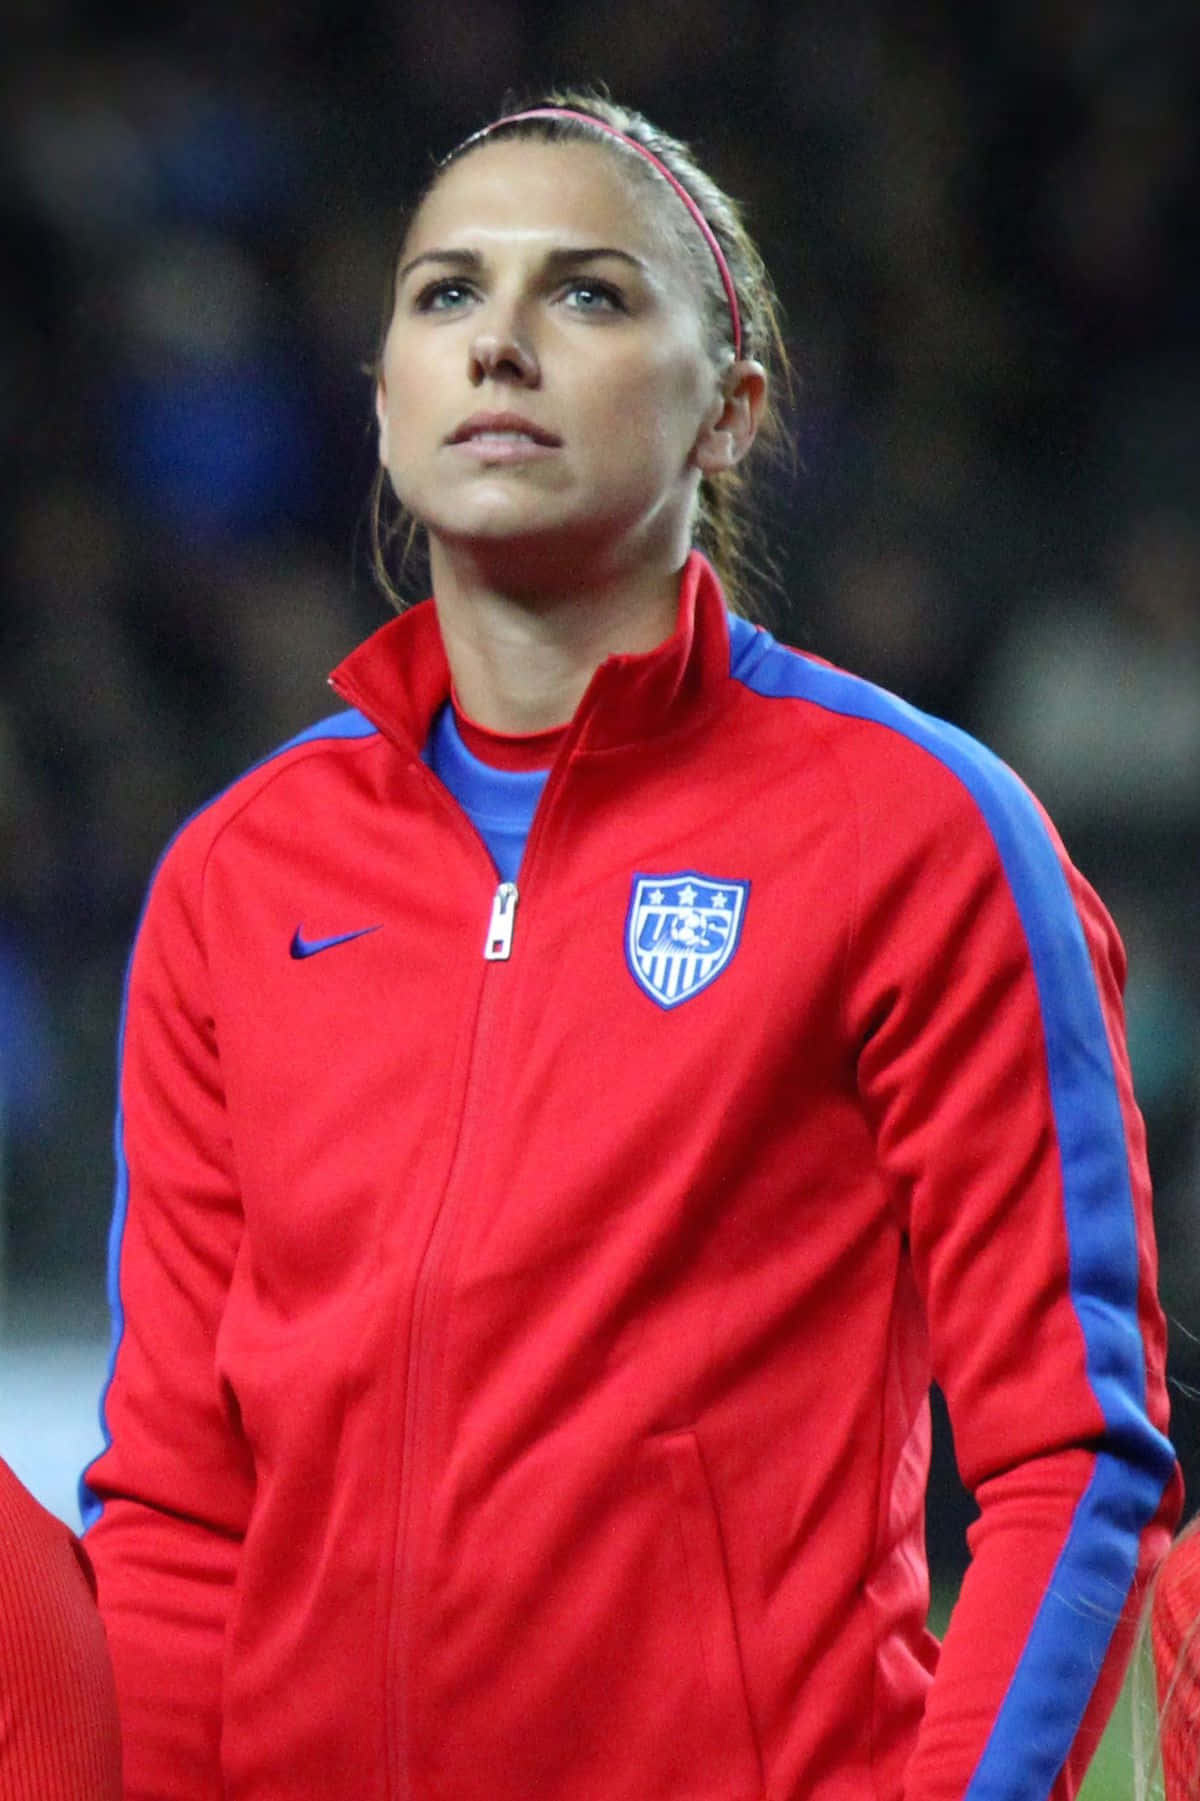 "Soccer Star Alex Morgan Aiming for the Win"